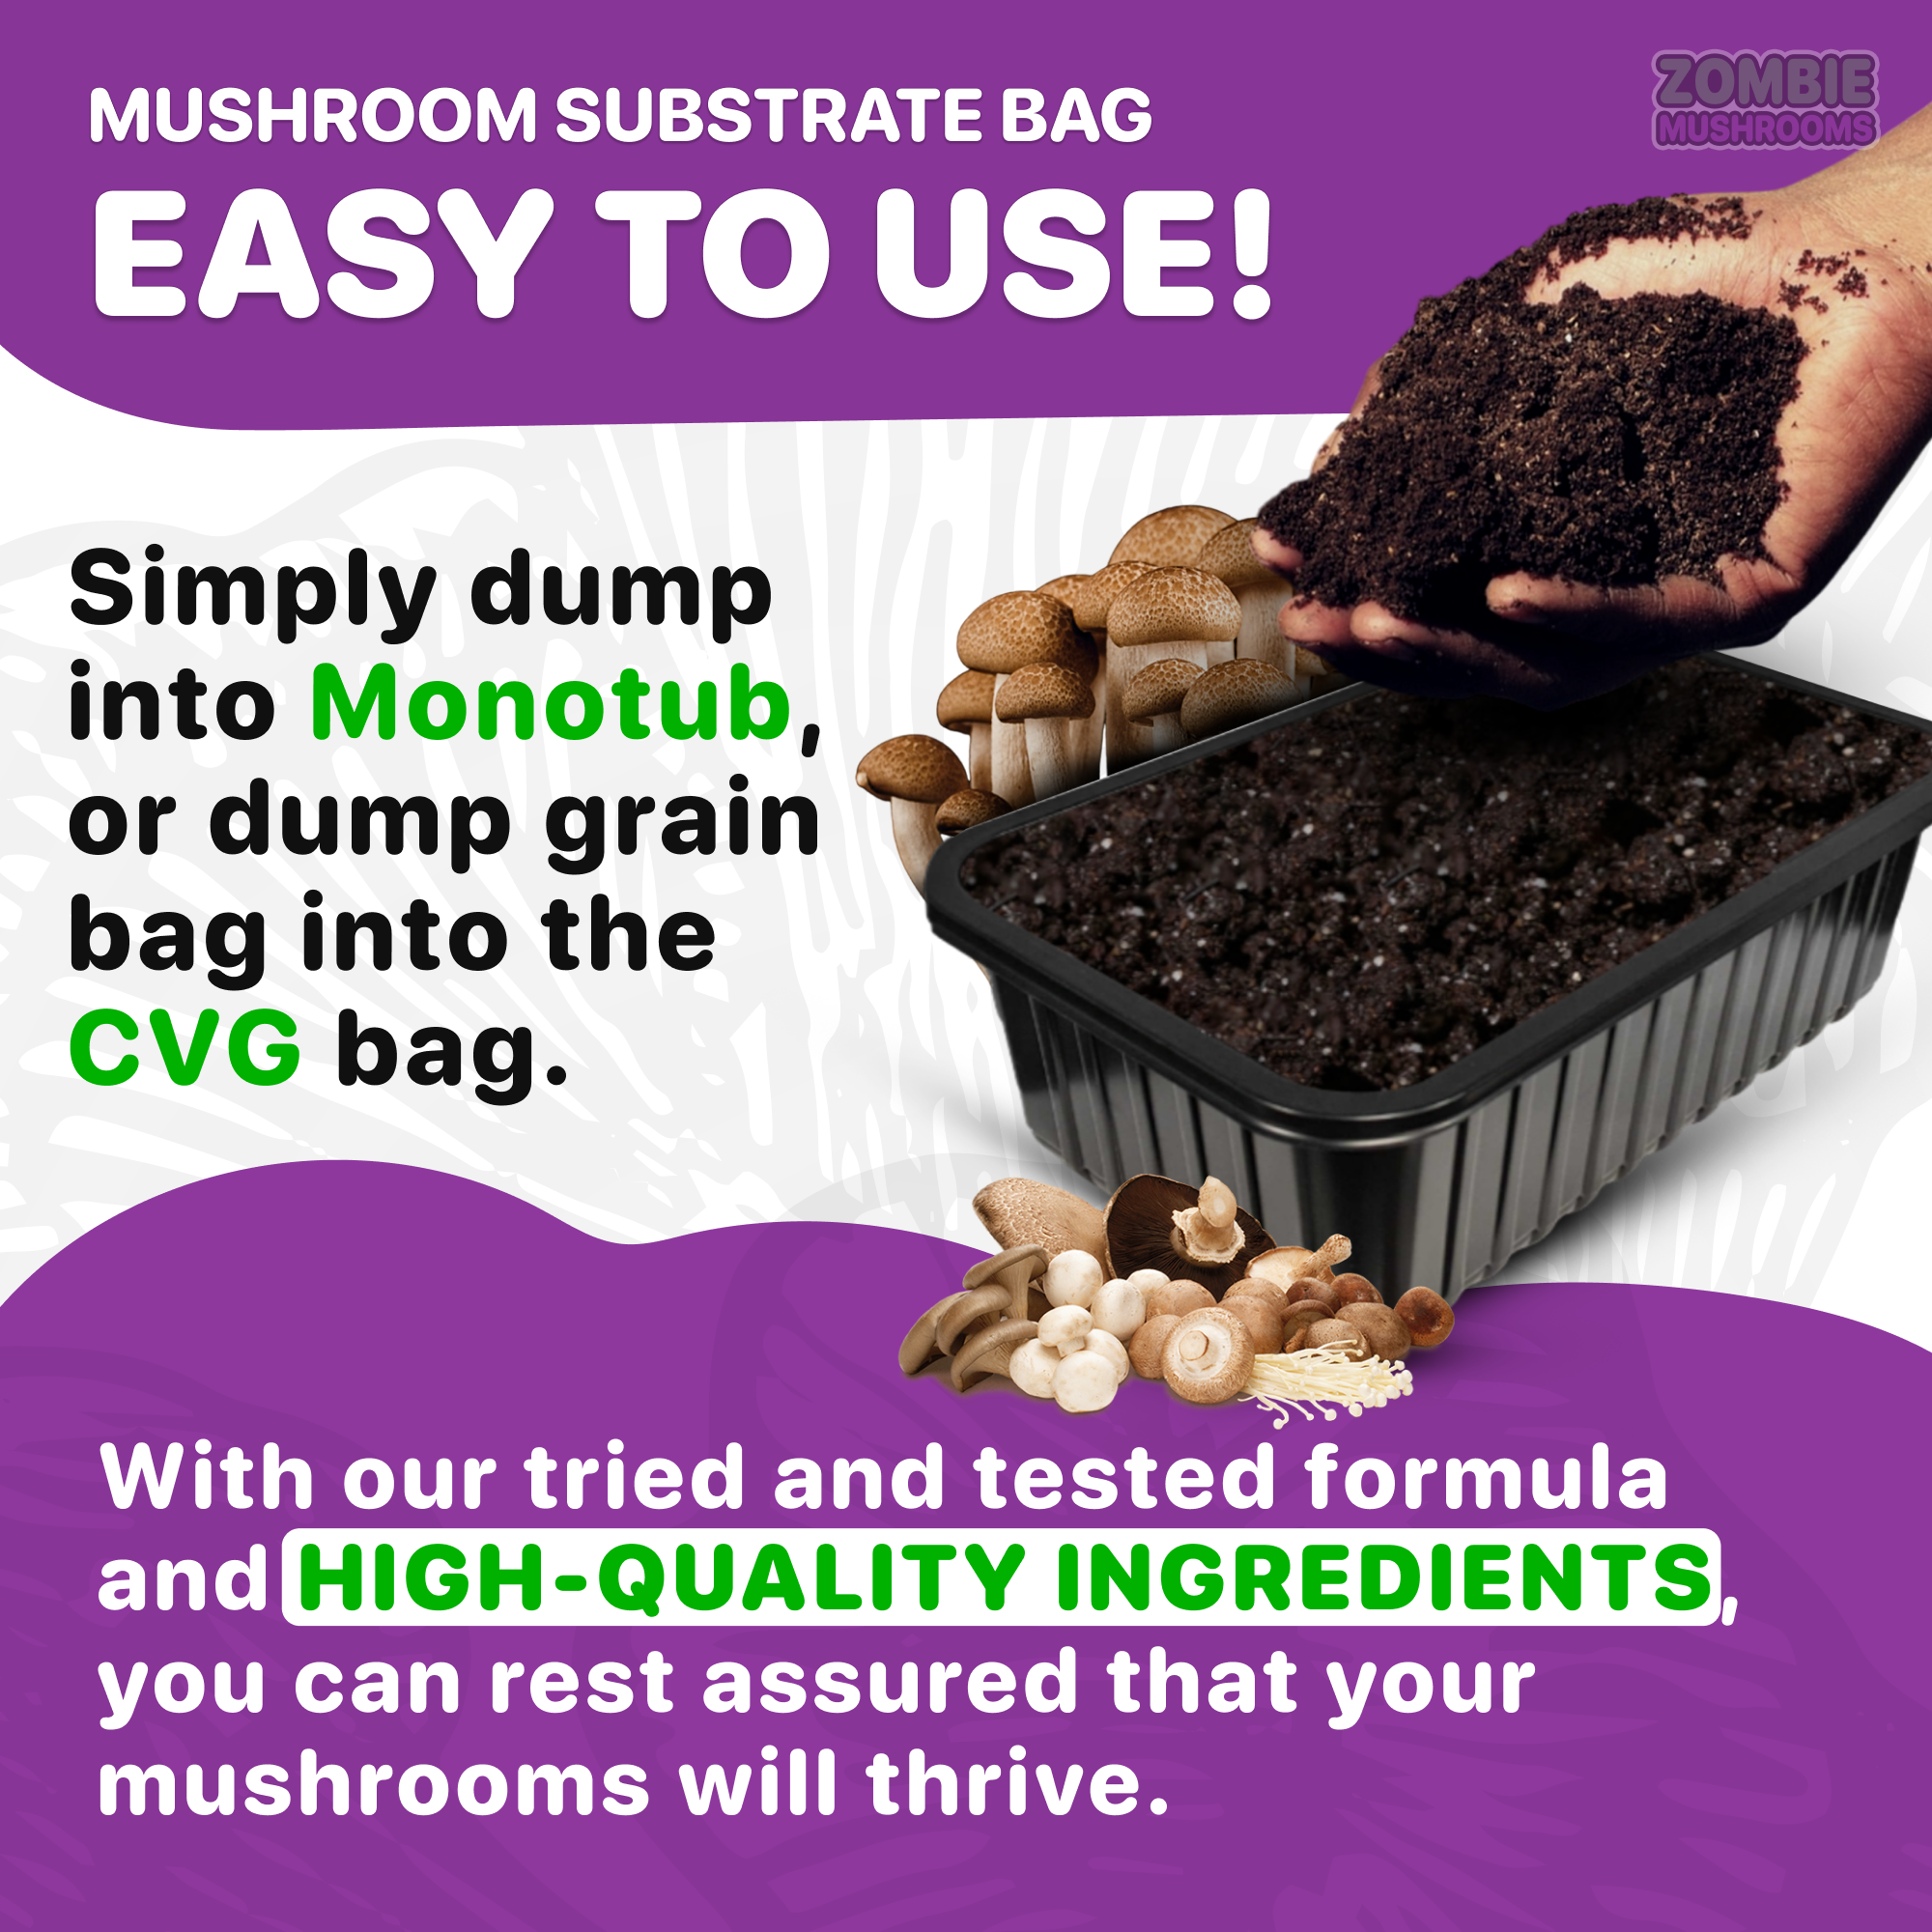 MUSHROOM SUBSTRATE BAG! EASY TO USE!